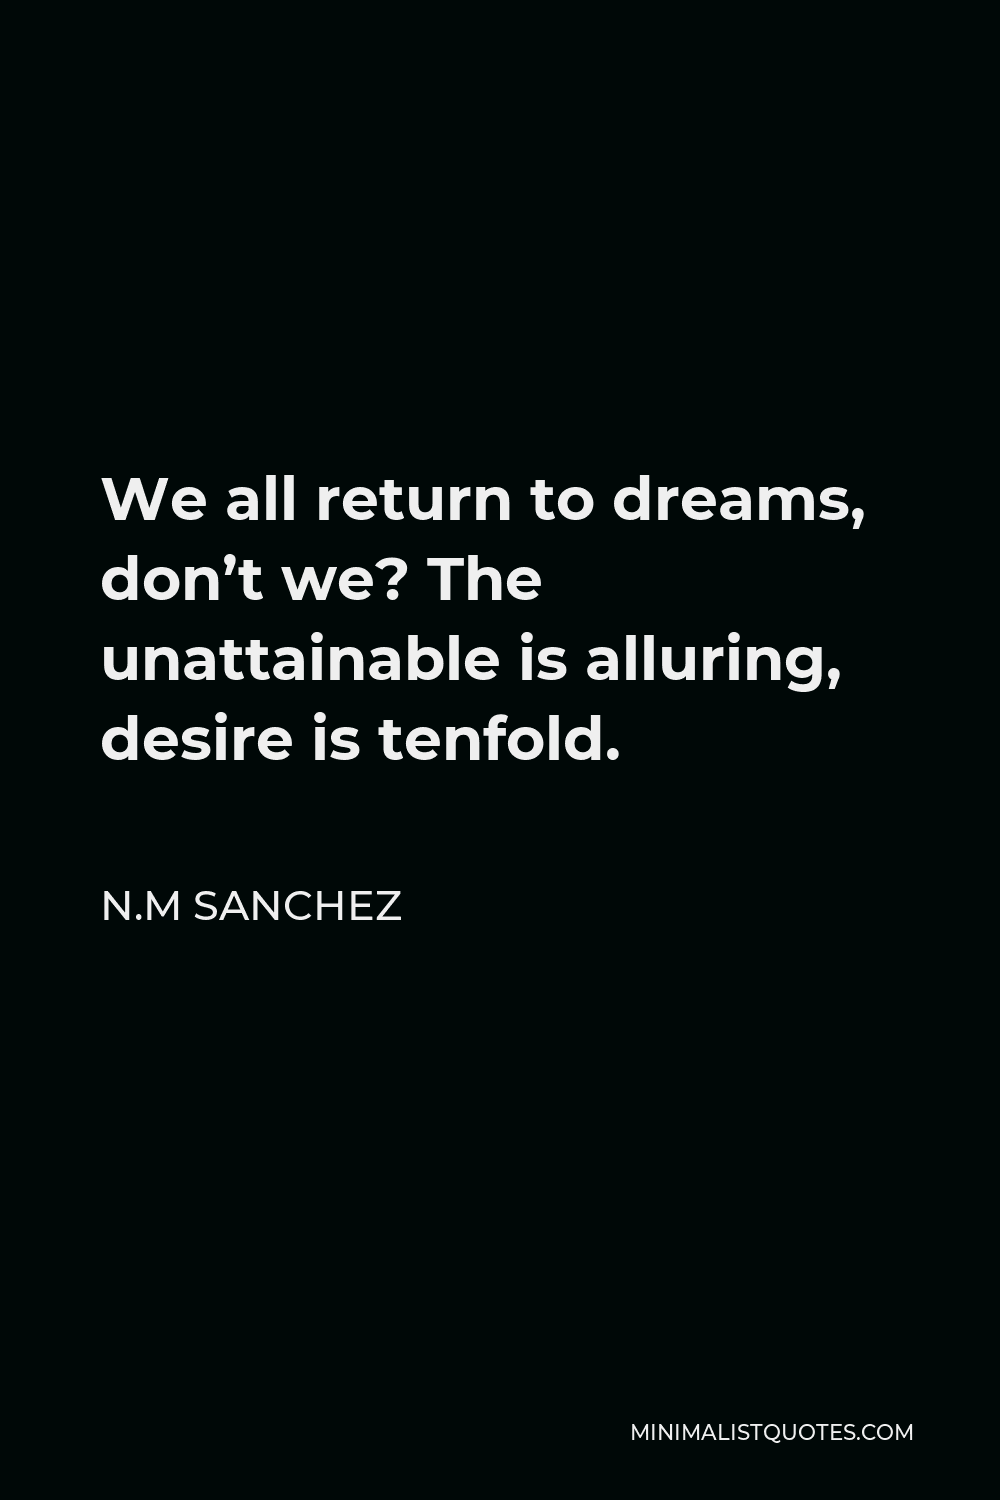 N.M Sanchez Quote - We all return to dreams, don’t we? The unattainable is alluring, desire is tenfold.